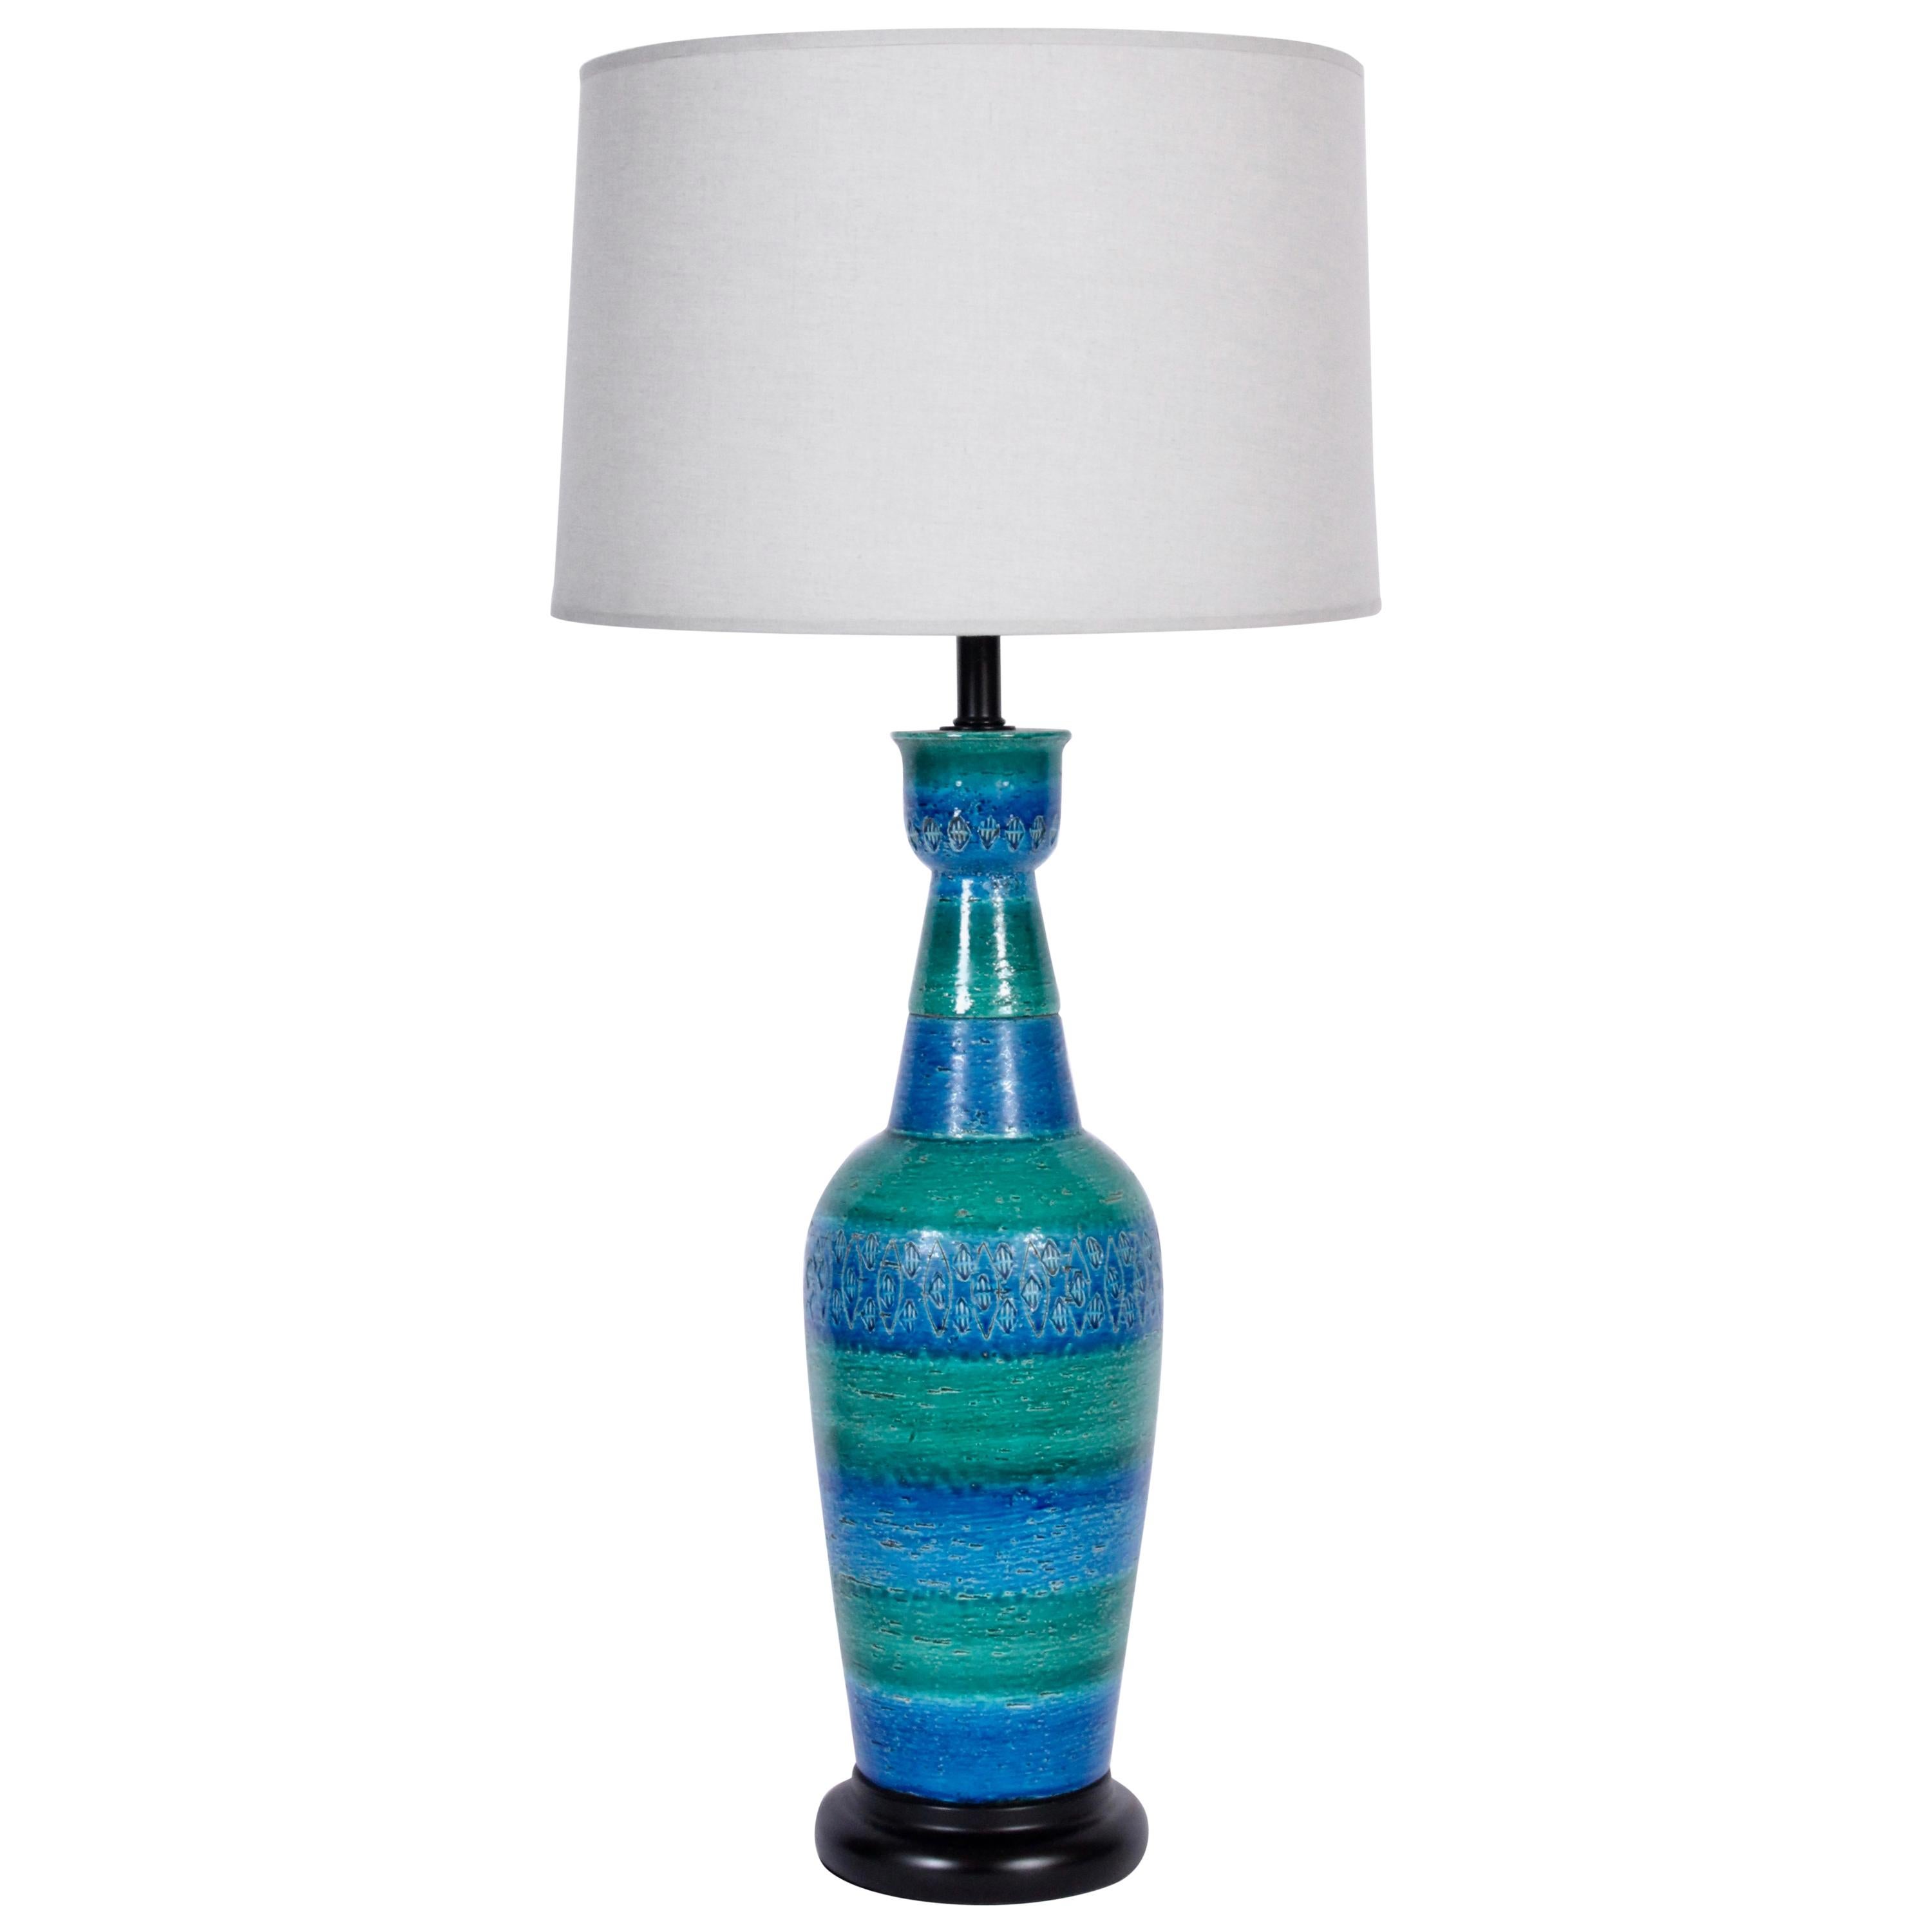 Substantial Aldo Londi Bitossi Incised Blue & Green Table Lamp, 1950's